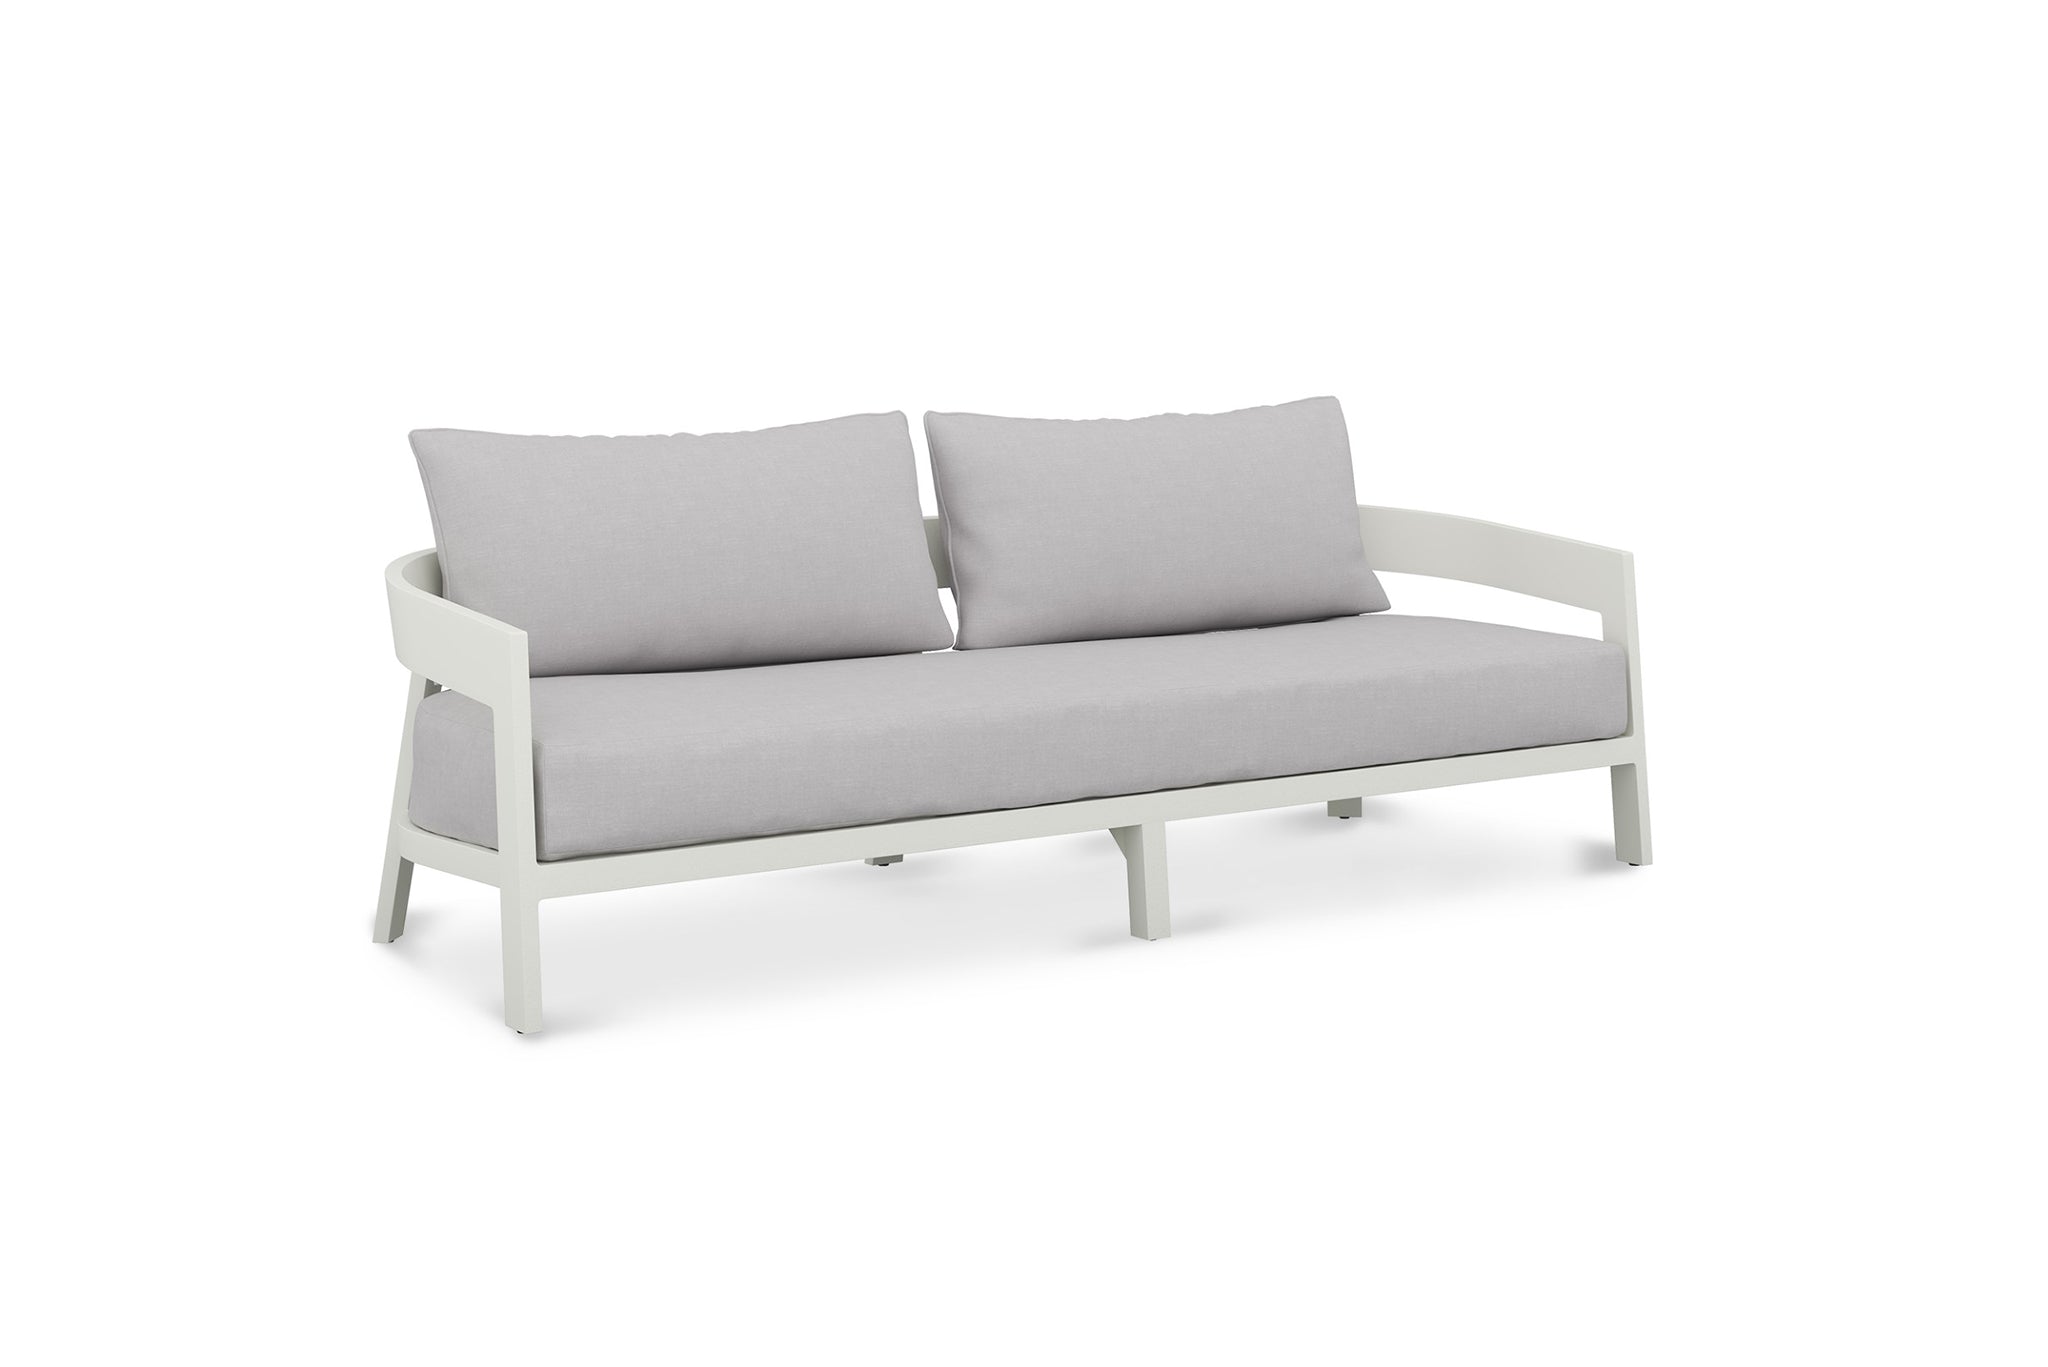 Queenscliff Outdoor Sofa – 3 Seater – White Powder Coated Frame